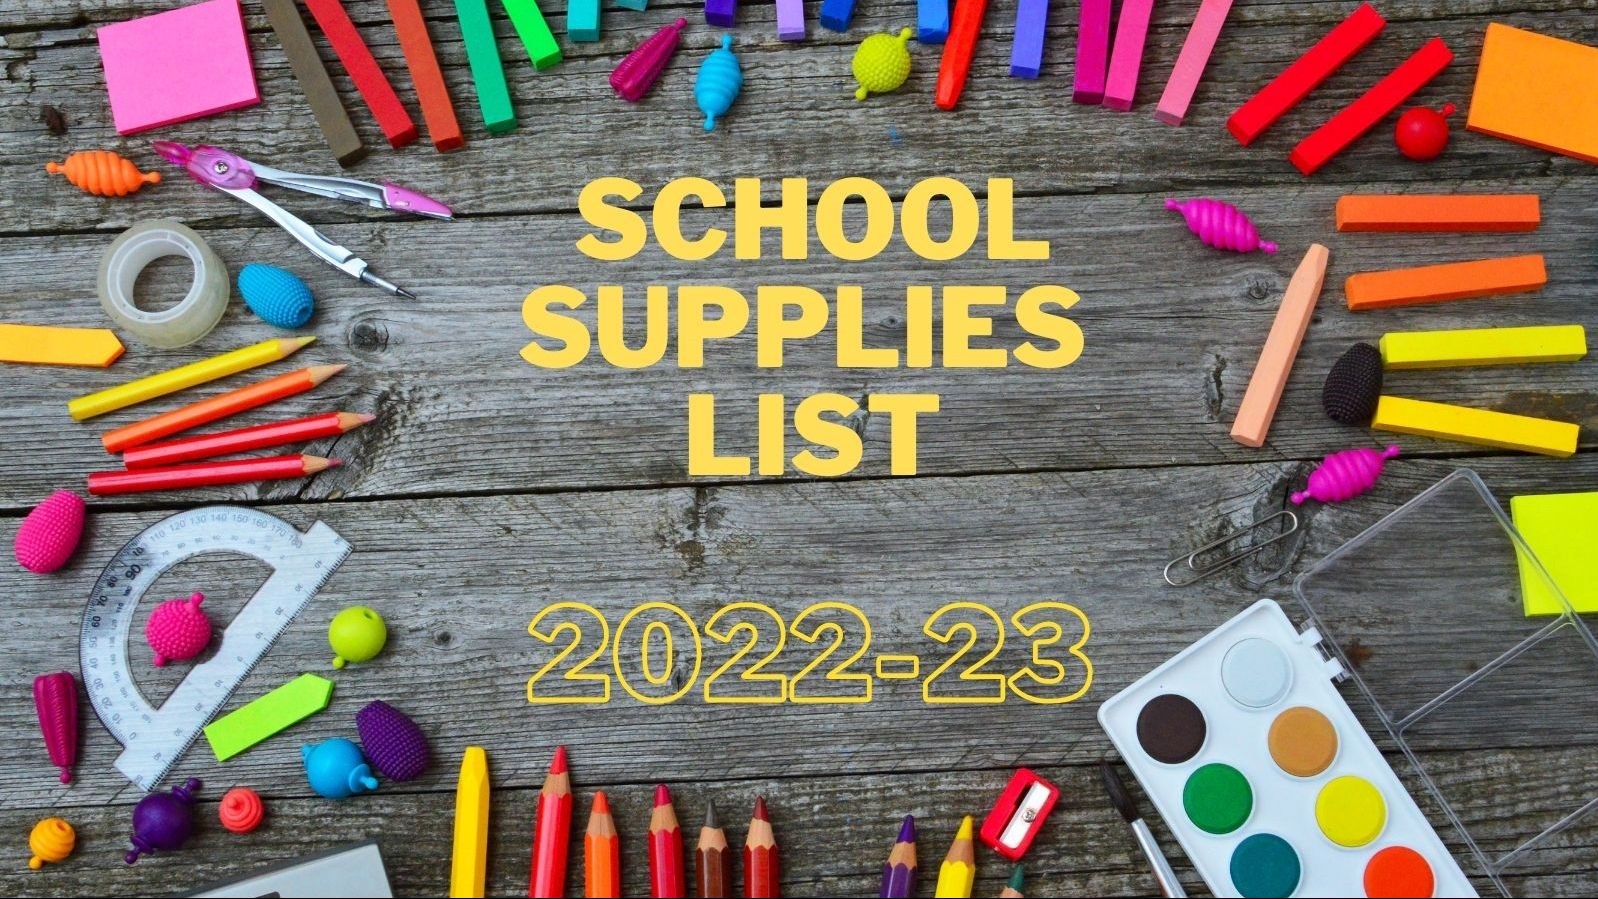 Click Here to access School Supply Lists for the 2022-2023 School Year